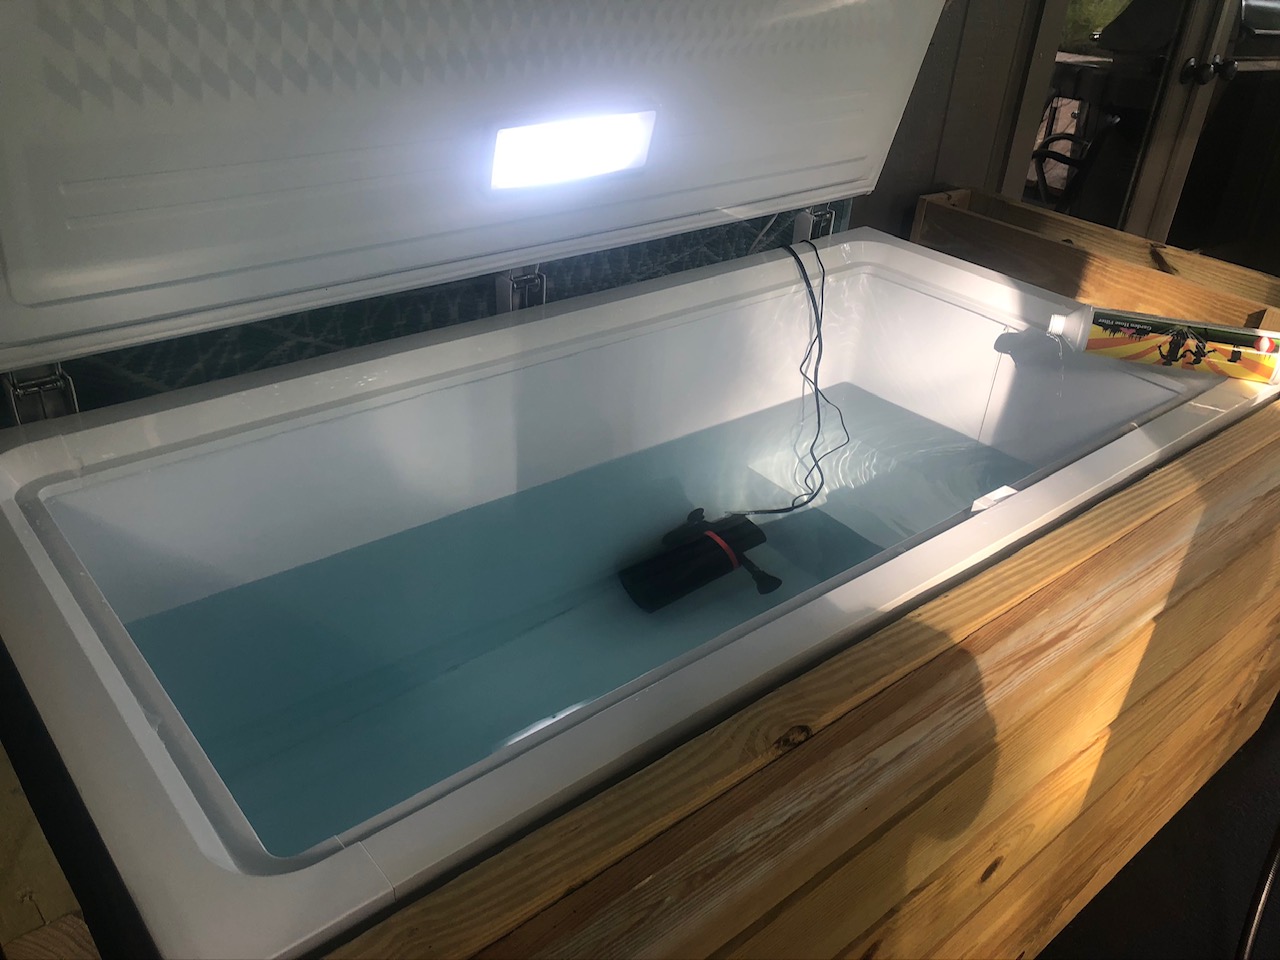 At Home Cold Exposure: Ice Bath - Coach PJ Nestler guides you through a cold  exposure routine, sharing how you can get creative in setting up an ice bath, By XPT